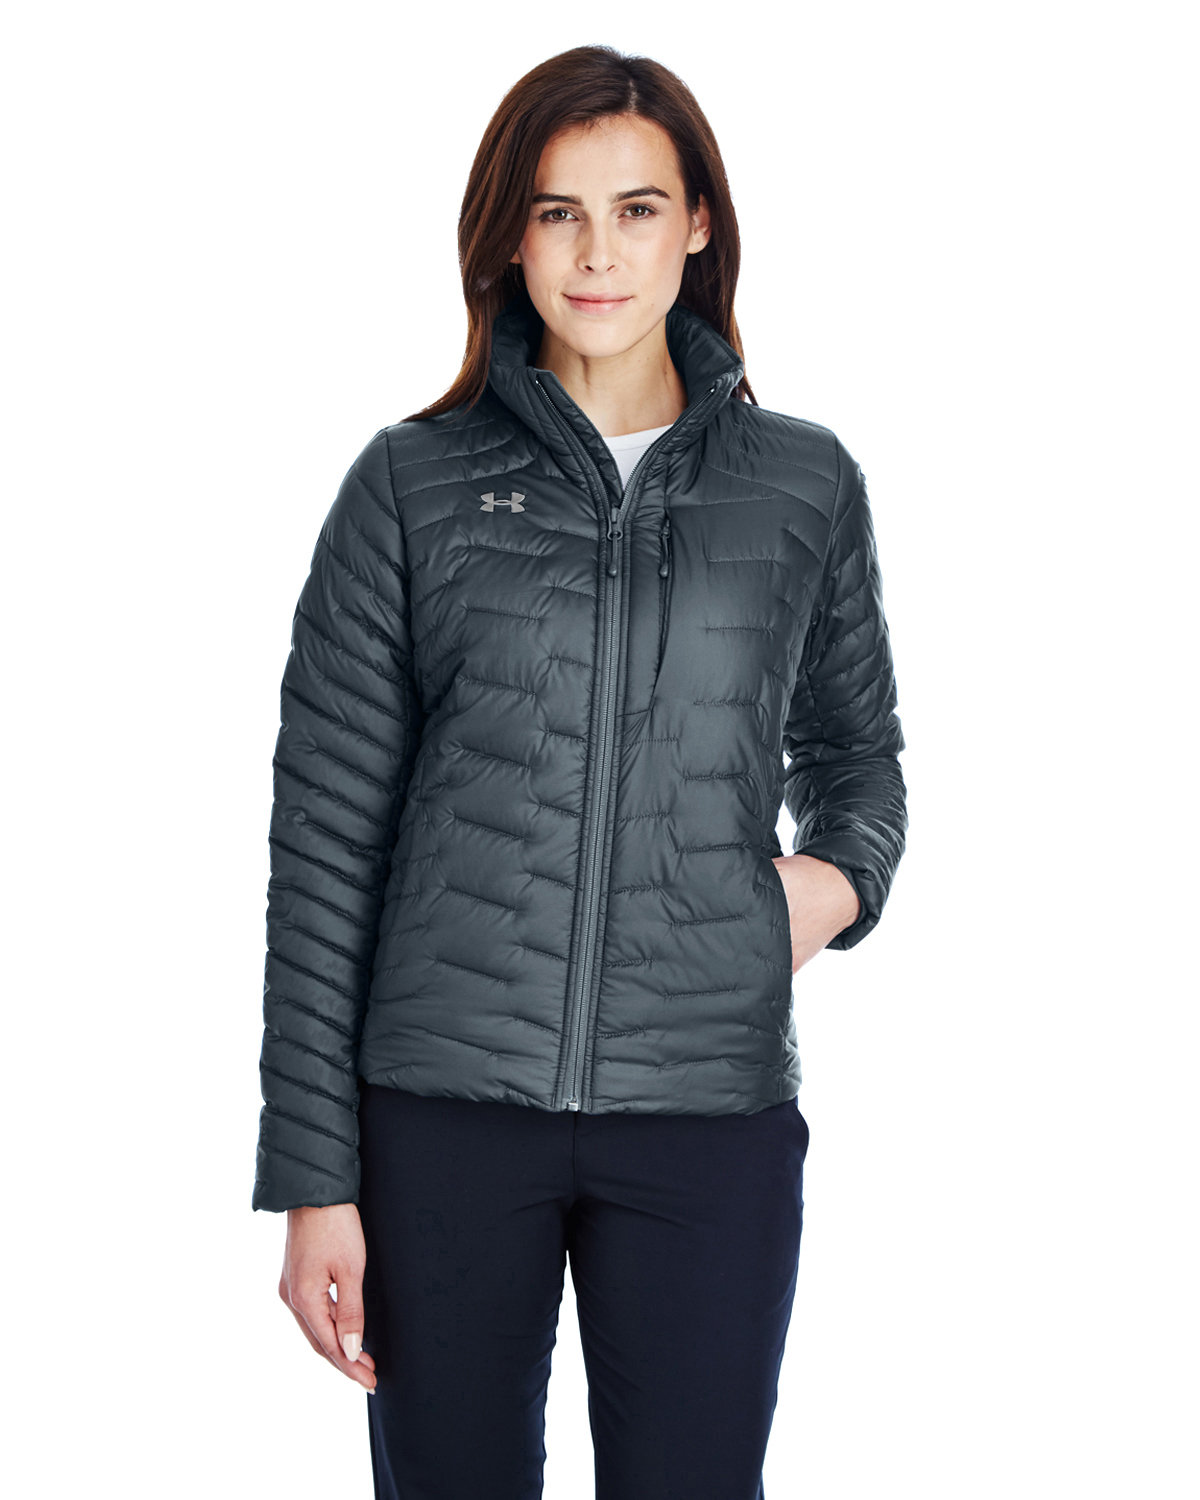 Under Armour SuperSale Ladies' Corporate Reactor Jacket STLTH GR/ ST _008 